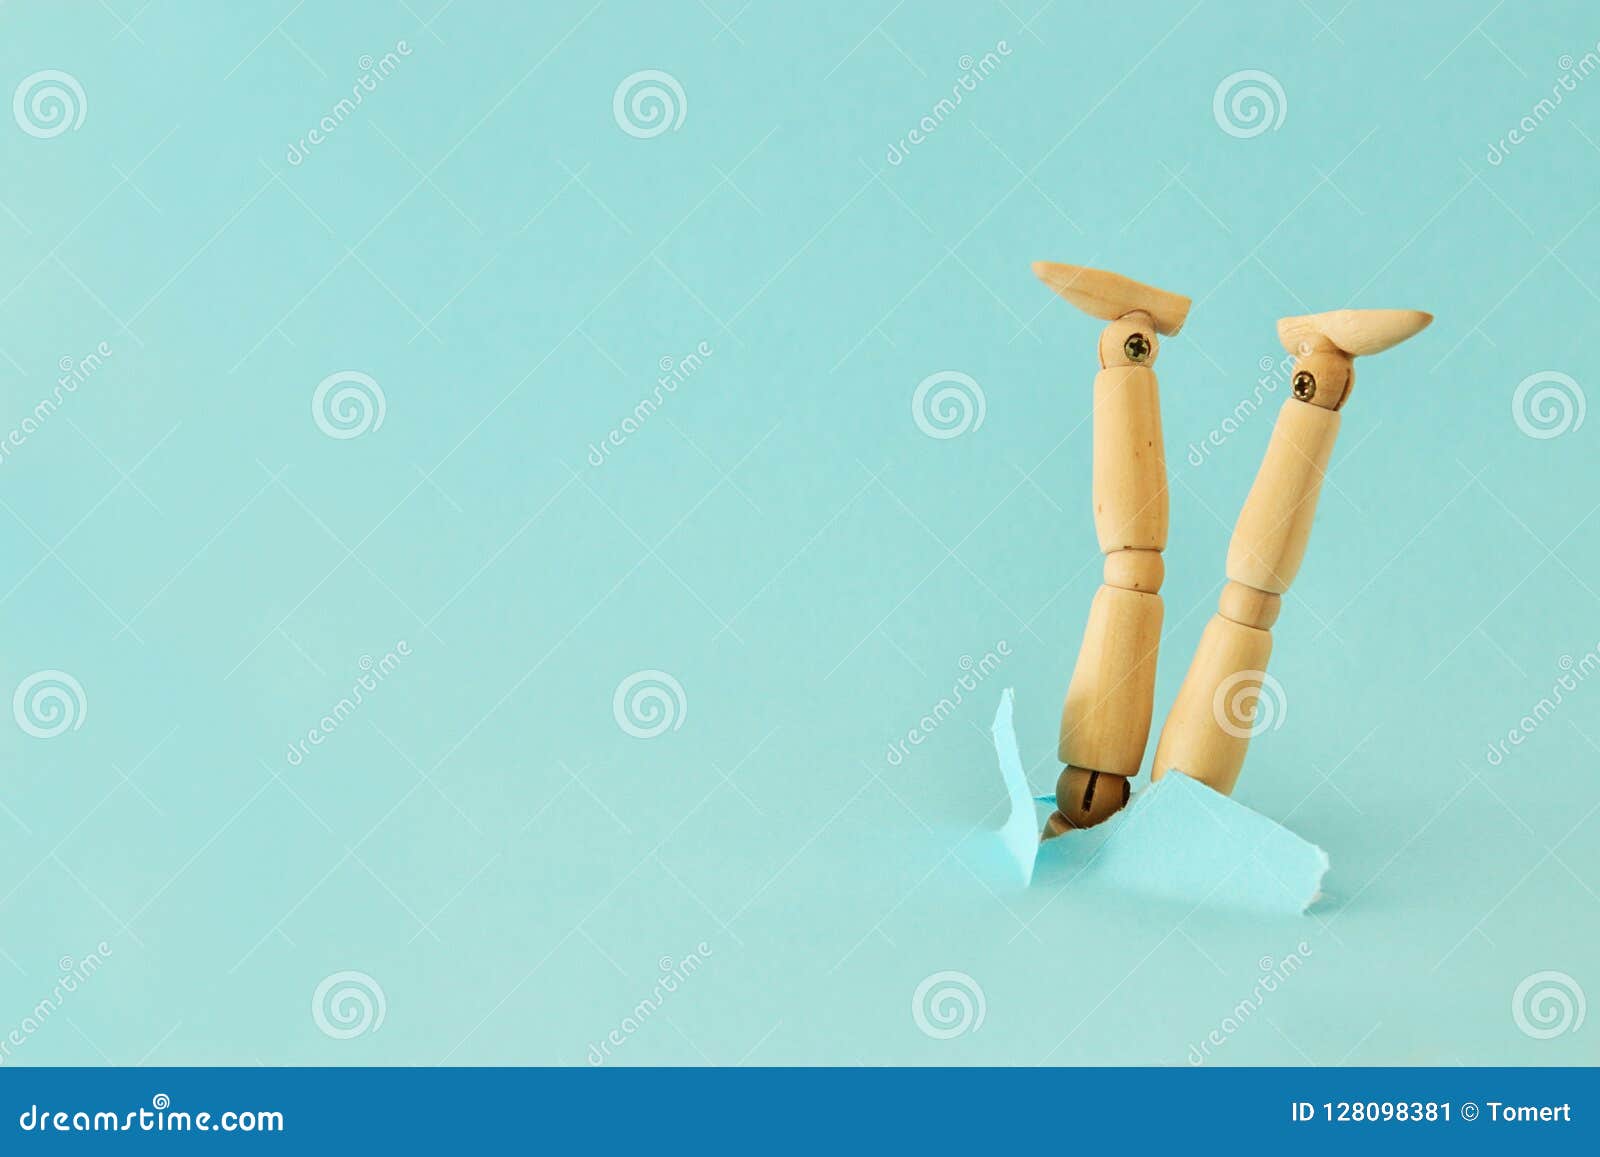 concept image of wooden dummy stuck upside down. stress and danger concept.